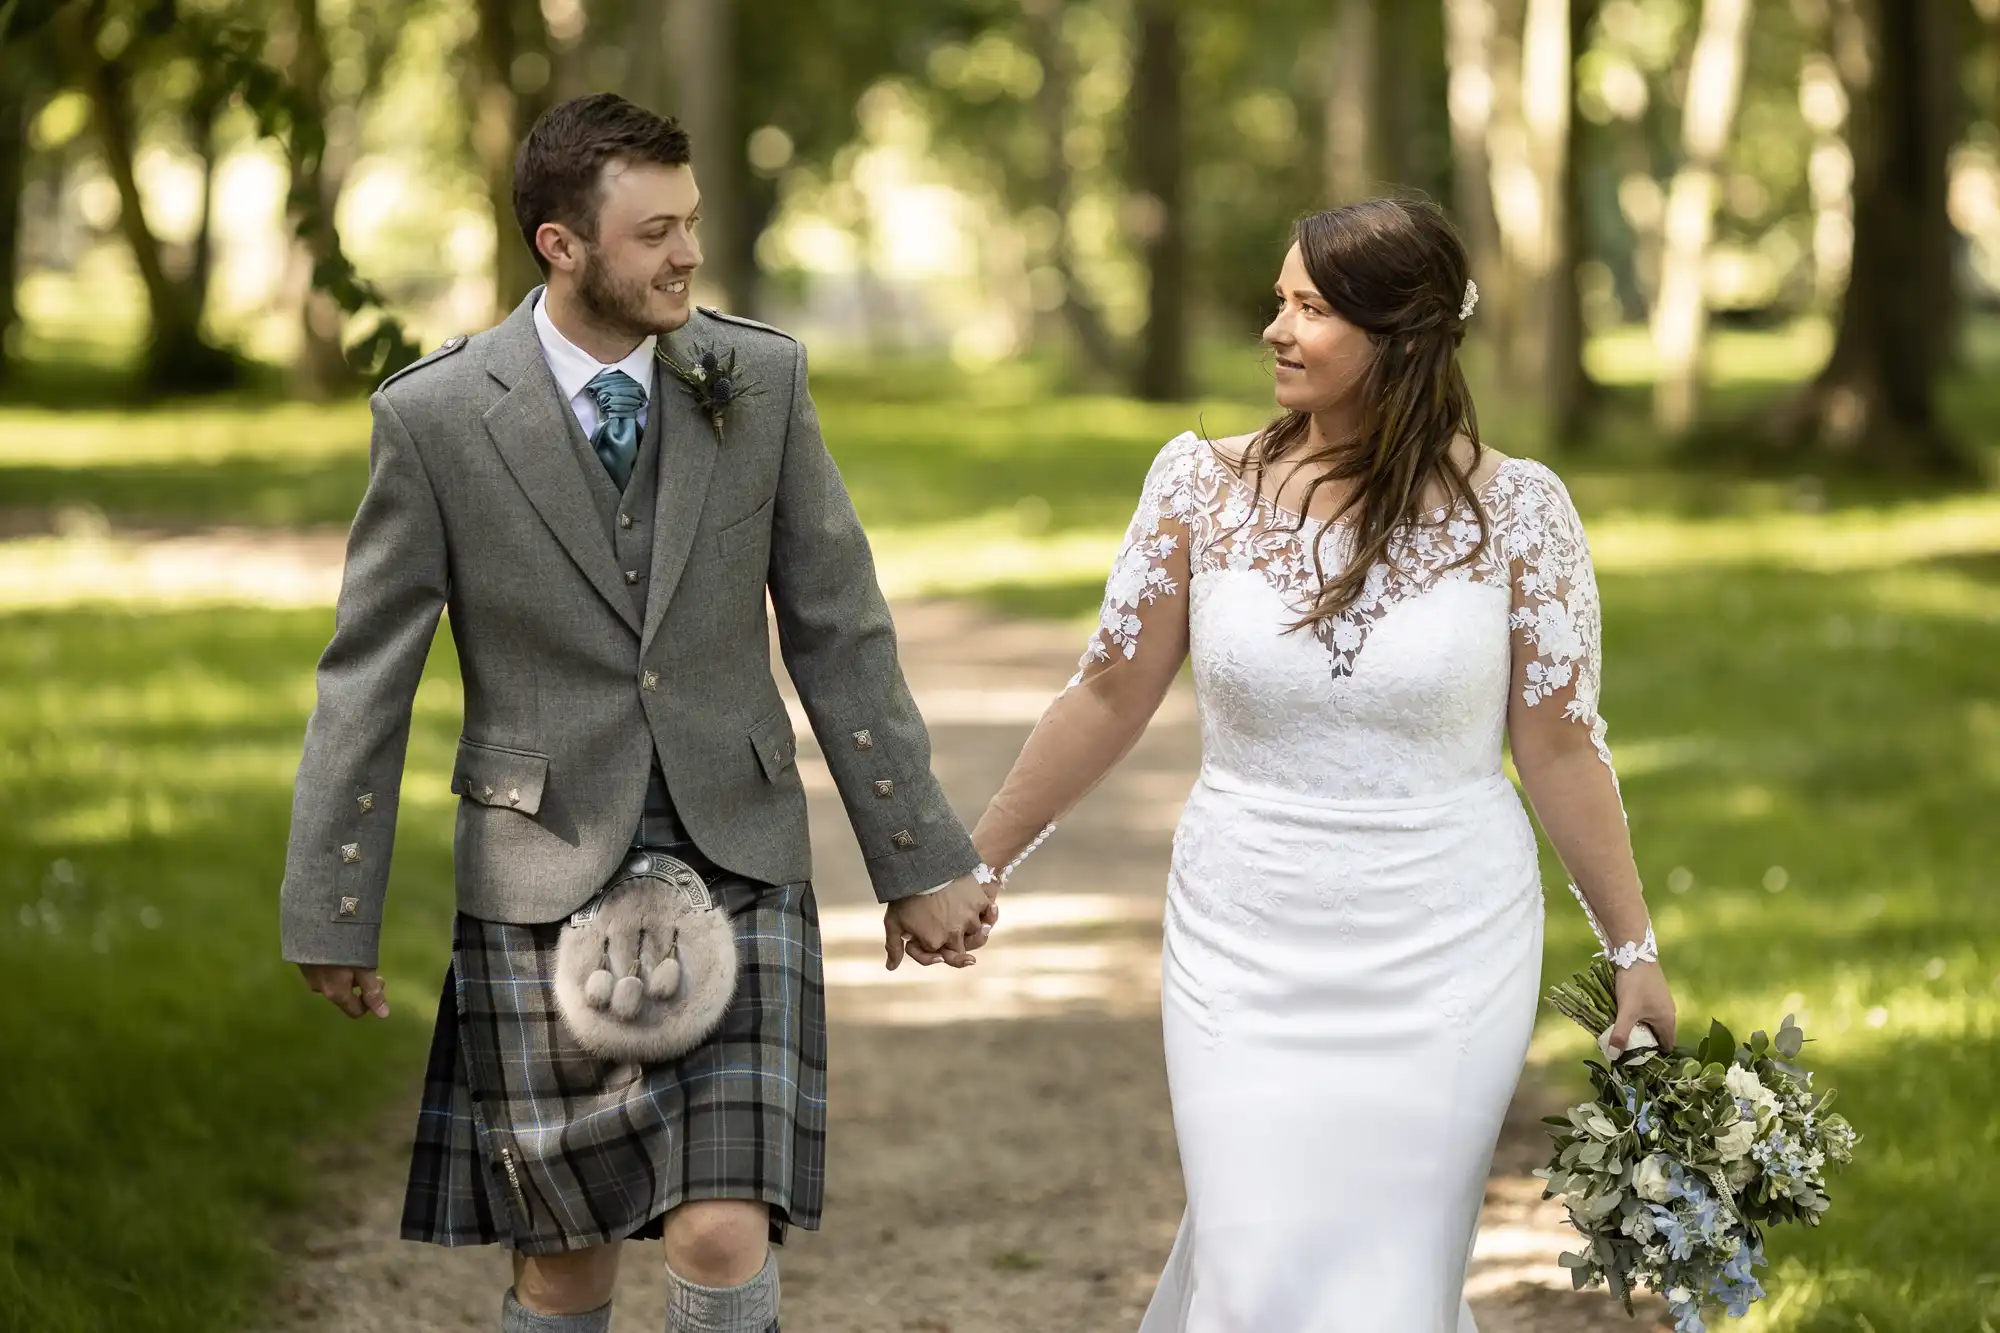 A bride and groom holding hands and smiling at each other as they walk through a sunlit park, the groom wearing a kilt and the bride in a white lace dress.